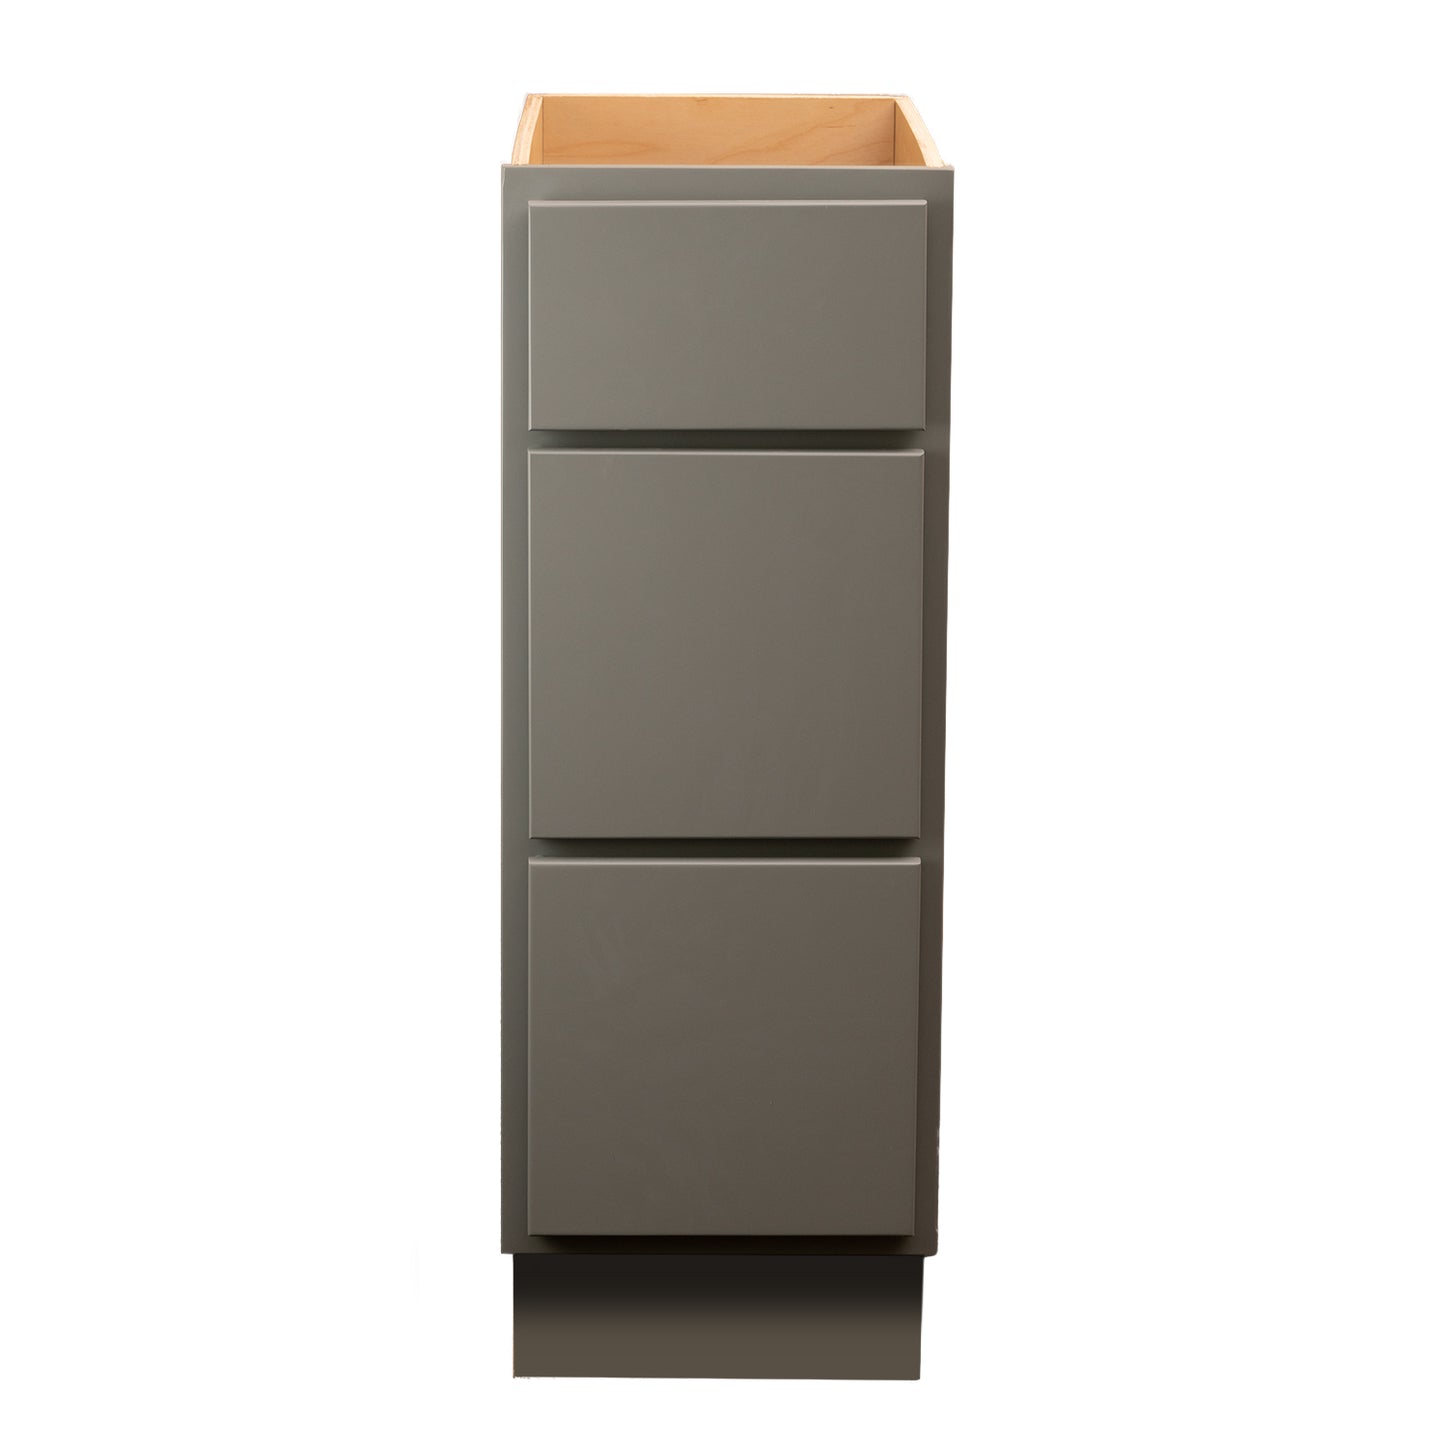 Quicklock RTA (Ready-to-Assemble) Magnetic Gray 3 Drawer Vanity Base Cabinet- 12"W